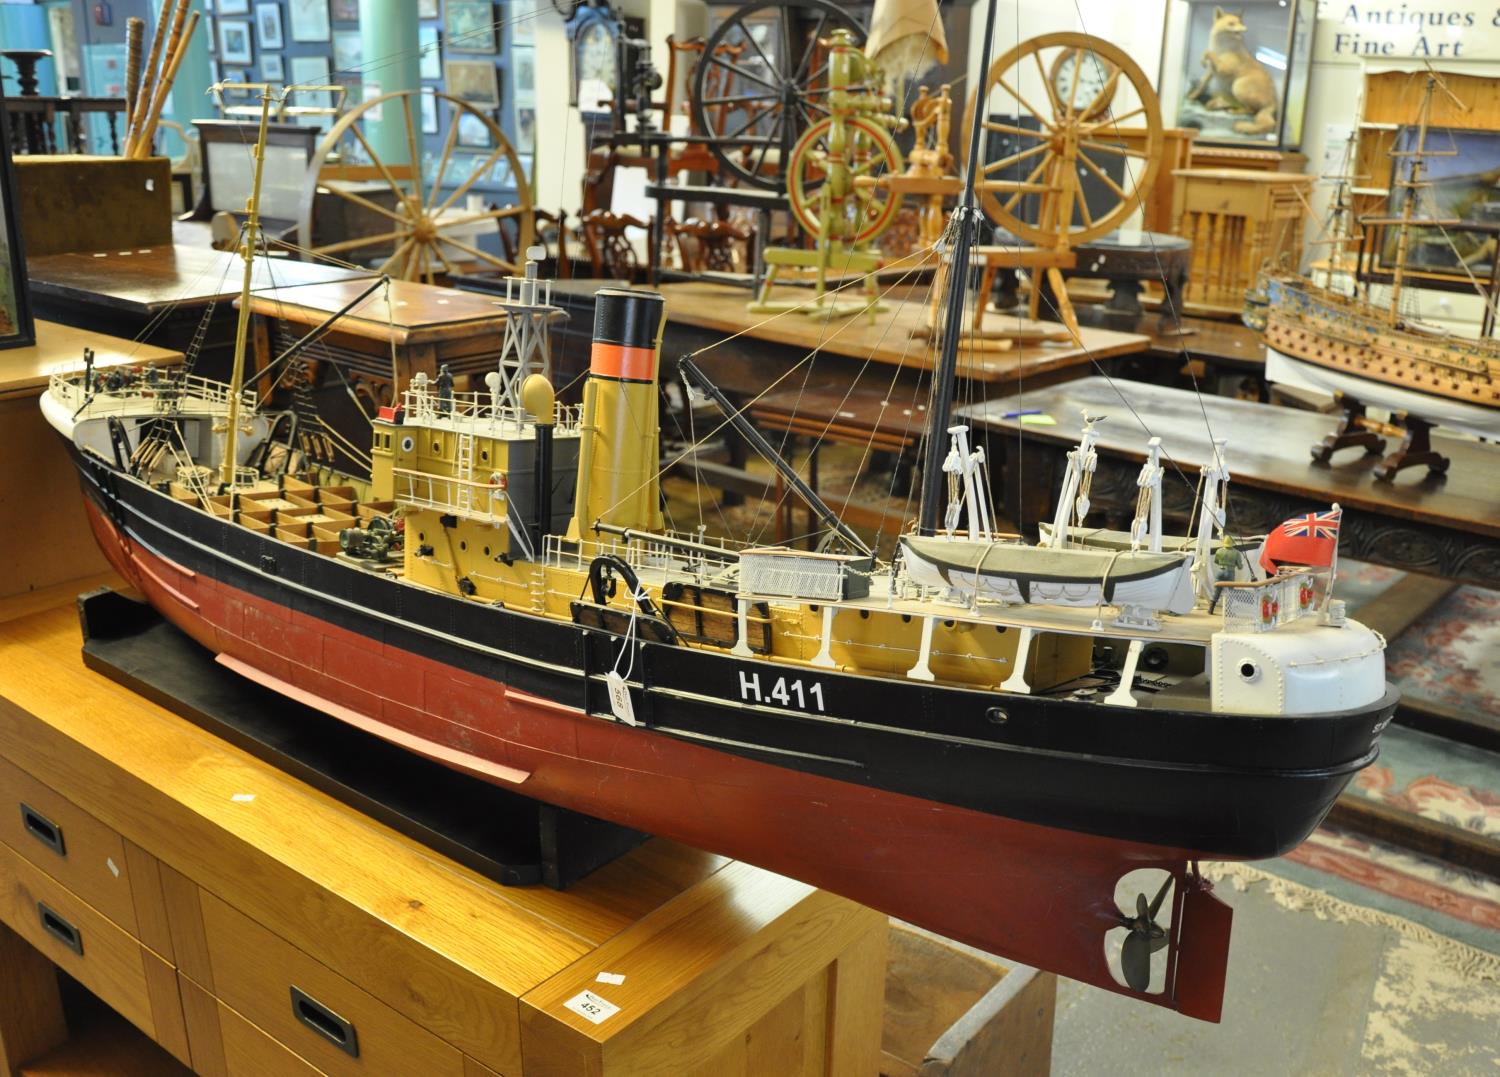 Exhibition quality scale mode of the steam trawler 'St Nectan' registered in Hull, no: H.411,